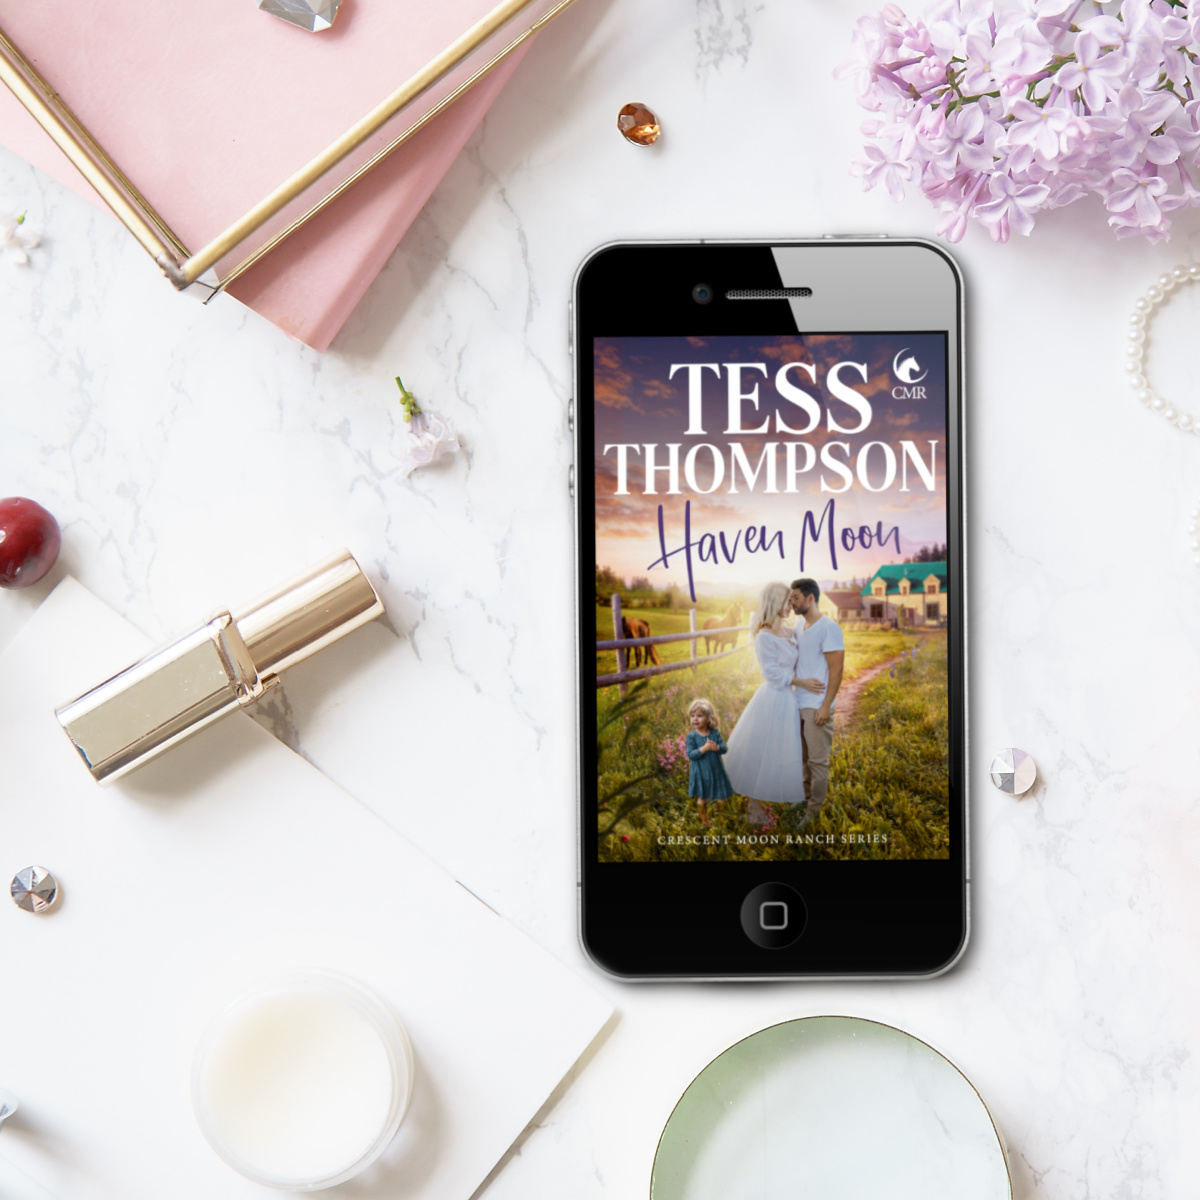 Haven Moon by Tess Thompson is available now!!

geni.us/HavenMoon
FREE with Kindle Unlimited

#contemporaryromance #romancenovel #RomanceBook #Bookstagram #books #bookblog #BookNerd #AdultBooks #booklover #romancereader @ElleWoodsPR  #1852media